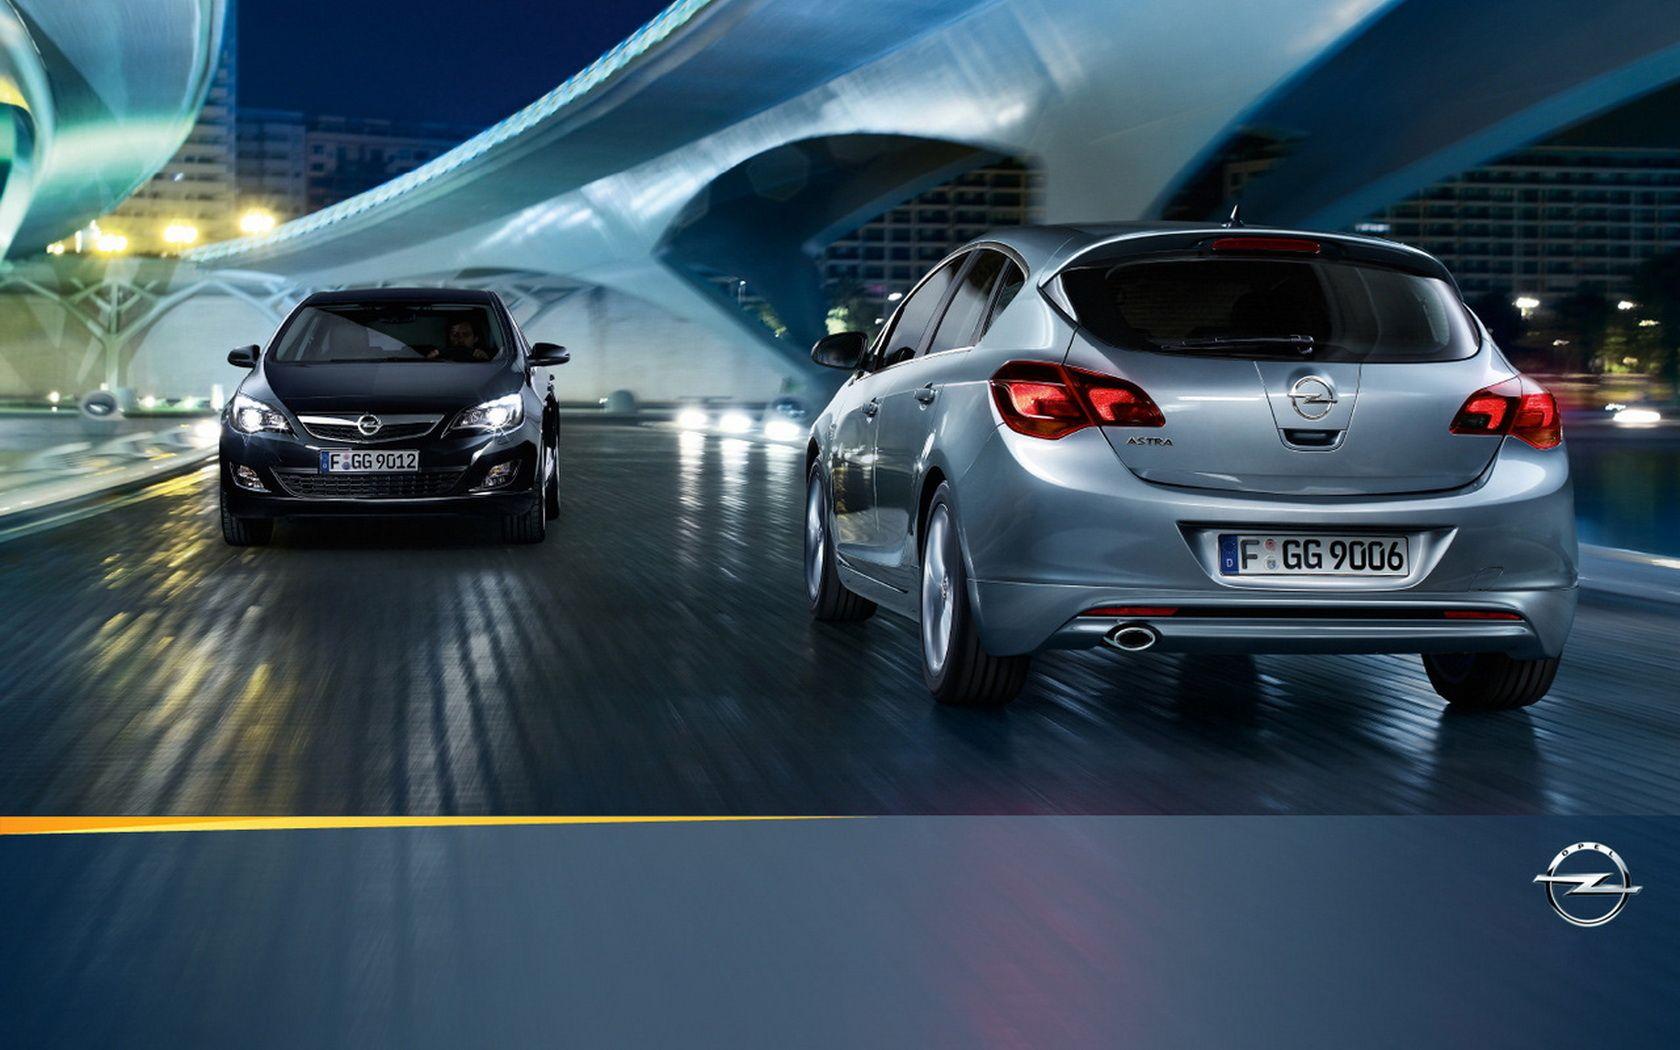 Opel Astra wallpaper and image, picture, photo